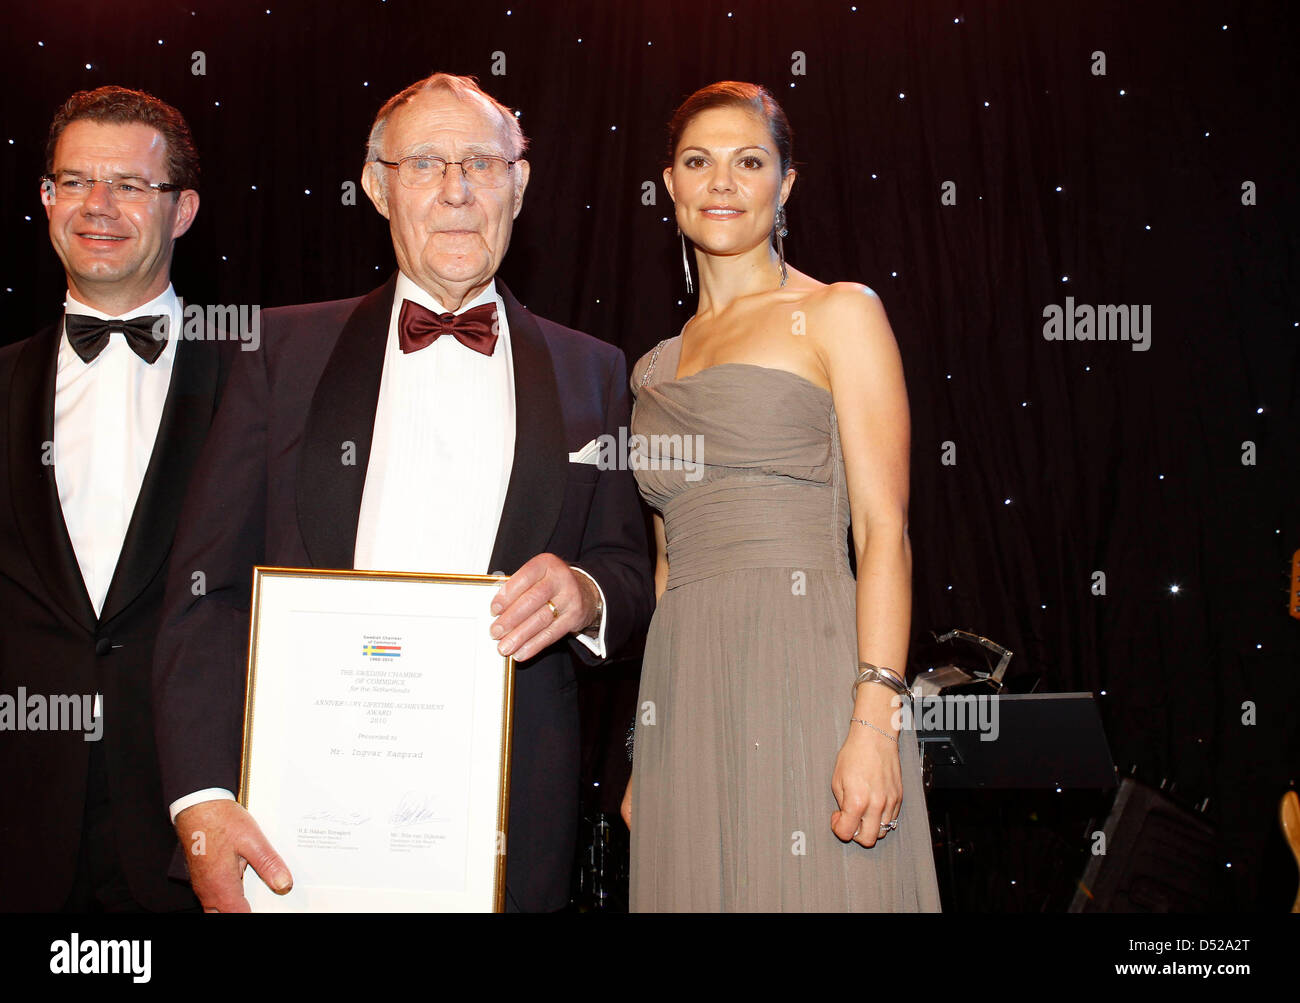 Crown Princess Victoria of Sweden (R) hands over The Swedish Chamber of Commerce Lifetime Achievement Award to 77-year-old founder of IKEA, Ingvar Kamprad (C) during the gala dinner on the 50th anniversary of the Swedish Chamber of Commerce in Noordwijk, the Netherlands, 28 October 2010. Photo:Reni van Maren/Pool ( NETHERLANDS OUT) Stock Photo